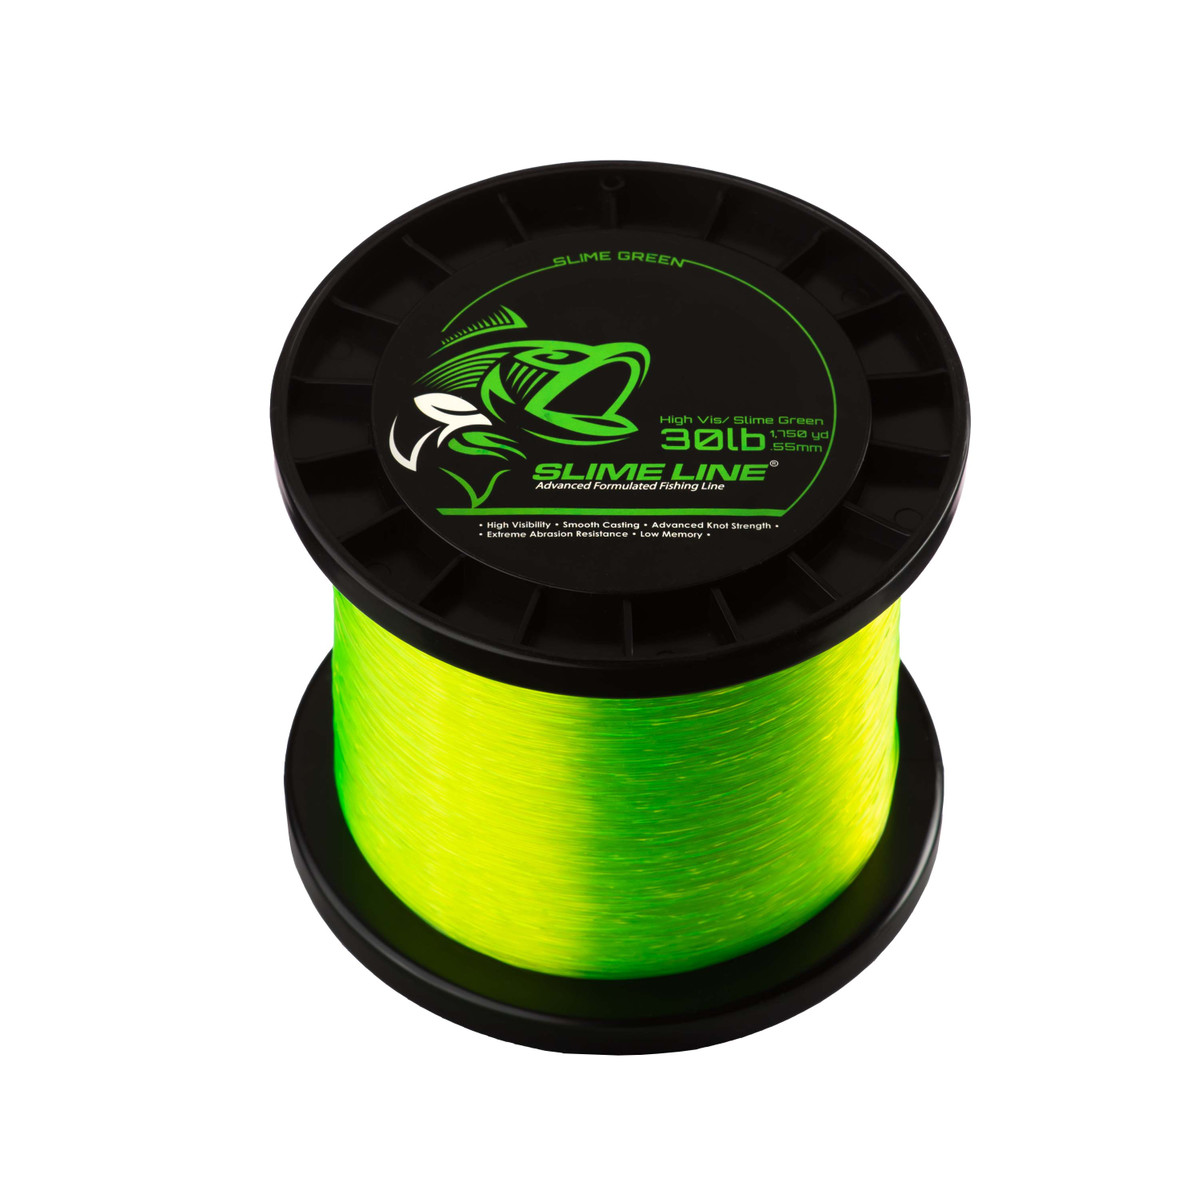 Slime Line SL-20UC-325 325-Yard, 20-Pound, Ultra Clear Fishing Line Spool  at Sutherlands